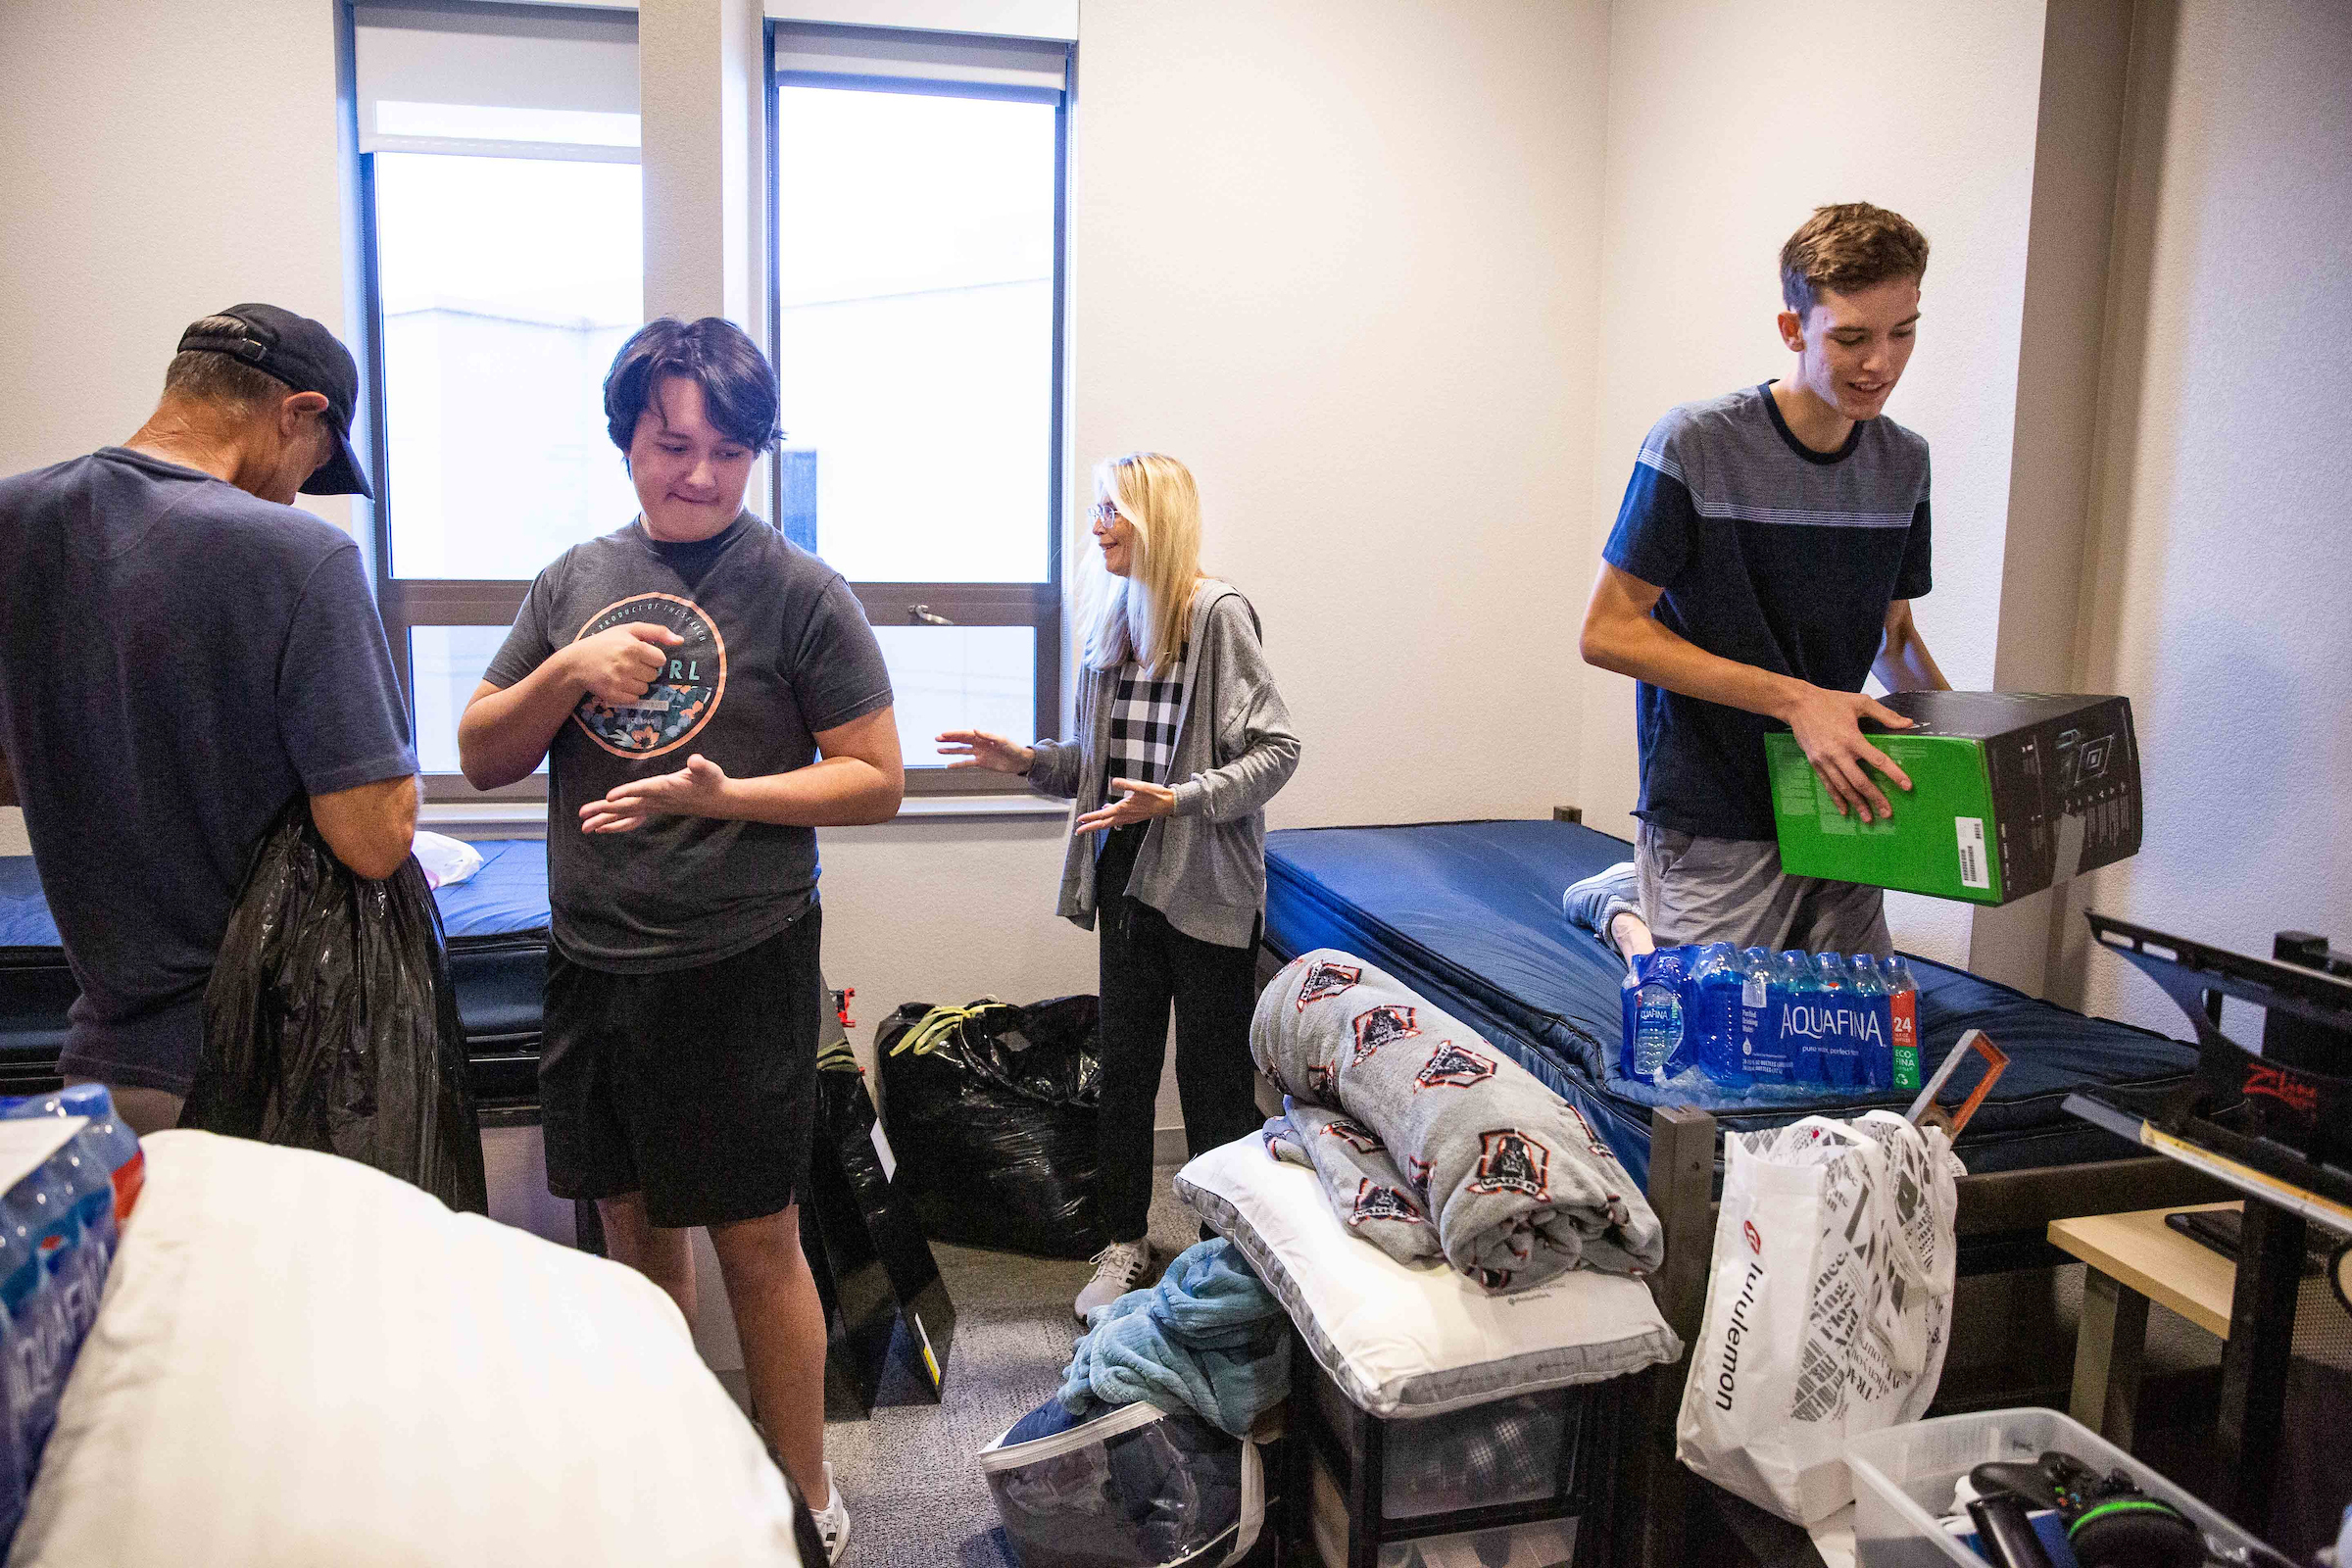 students and family unpack in dorm room